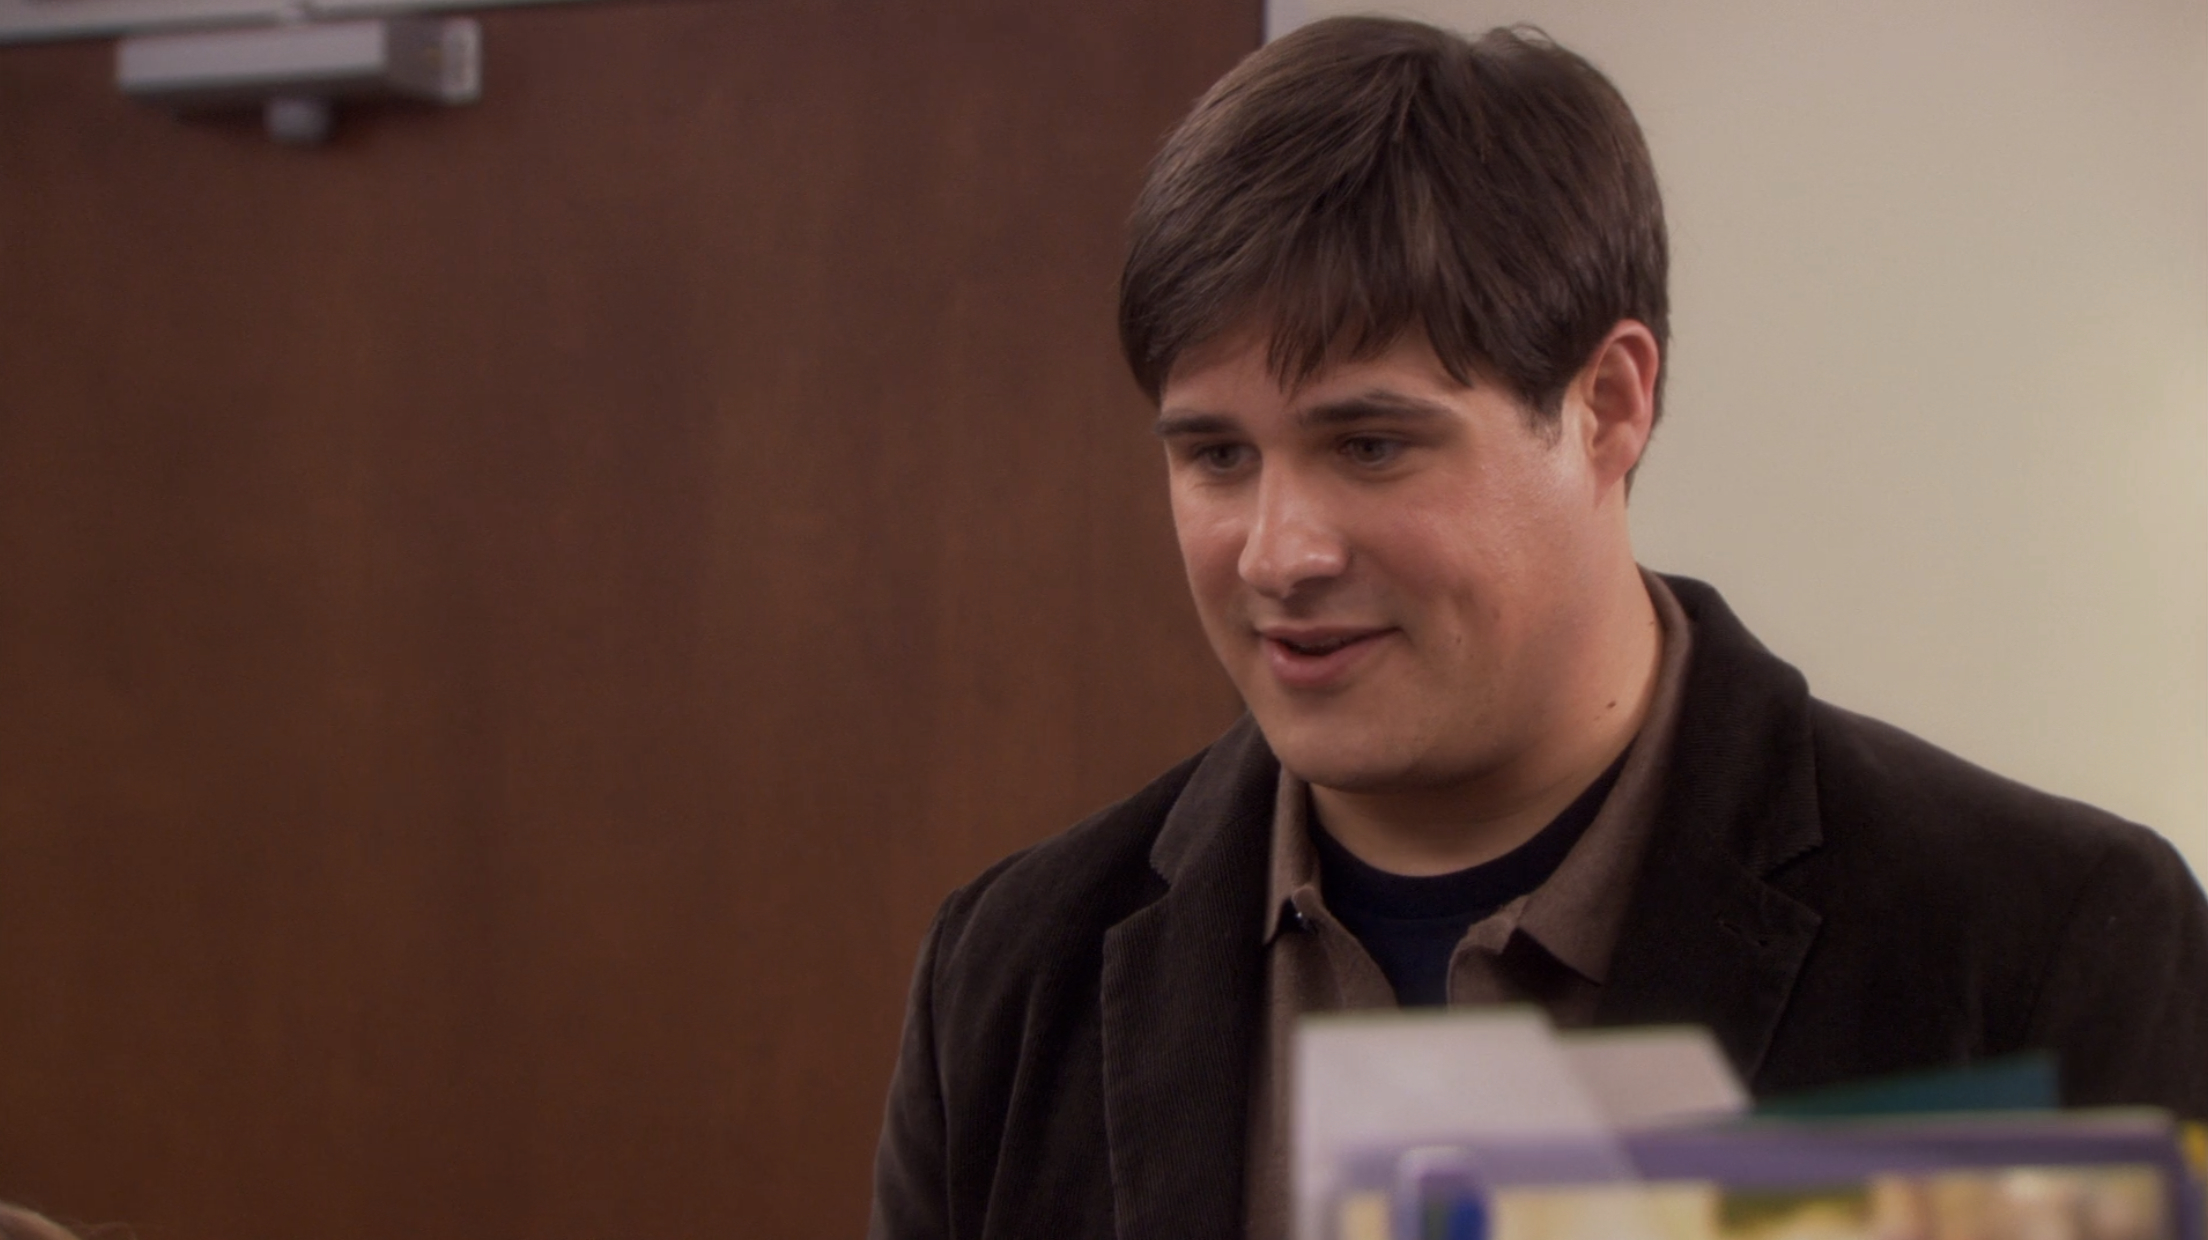 rich sommer as alex on the office